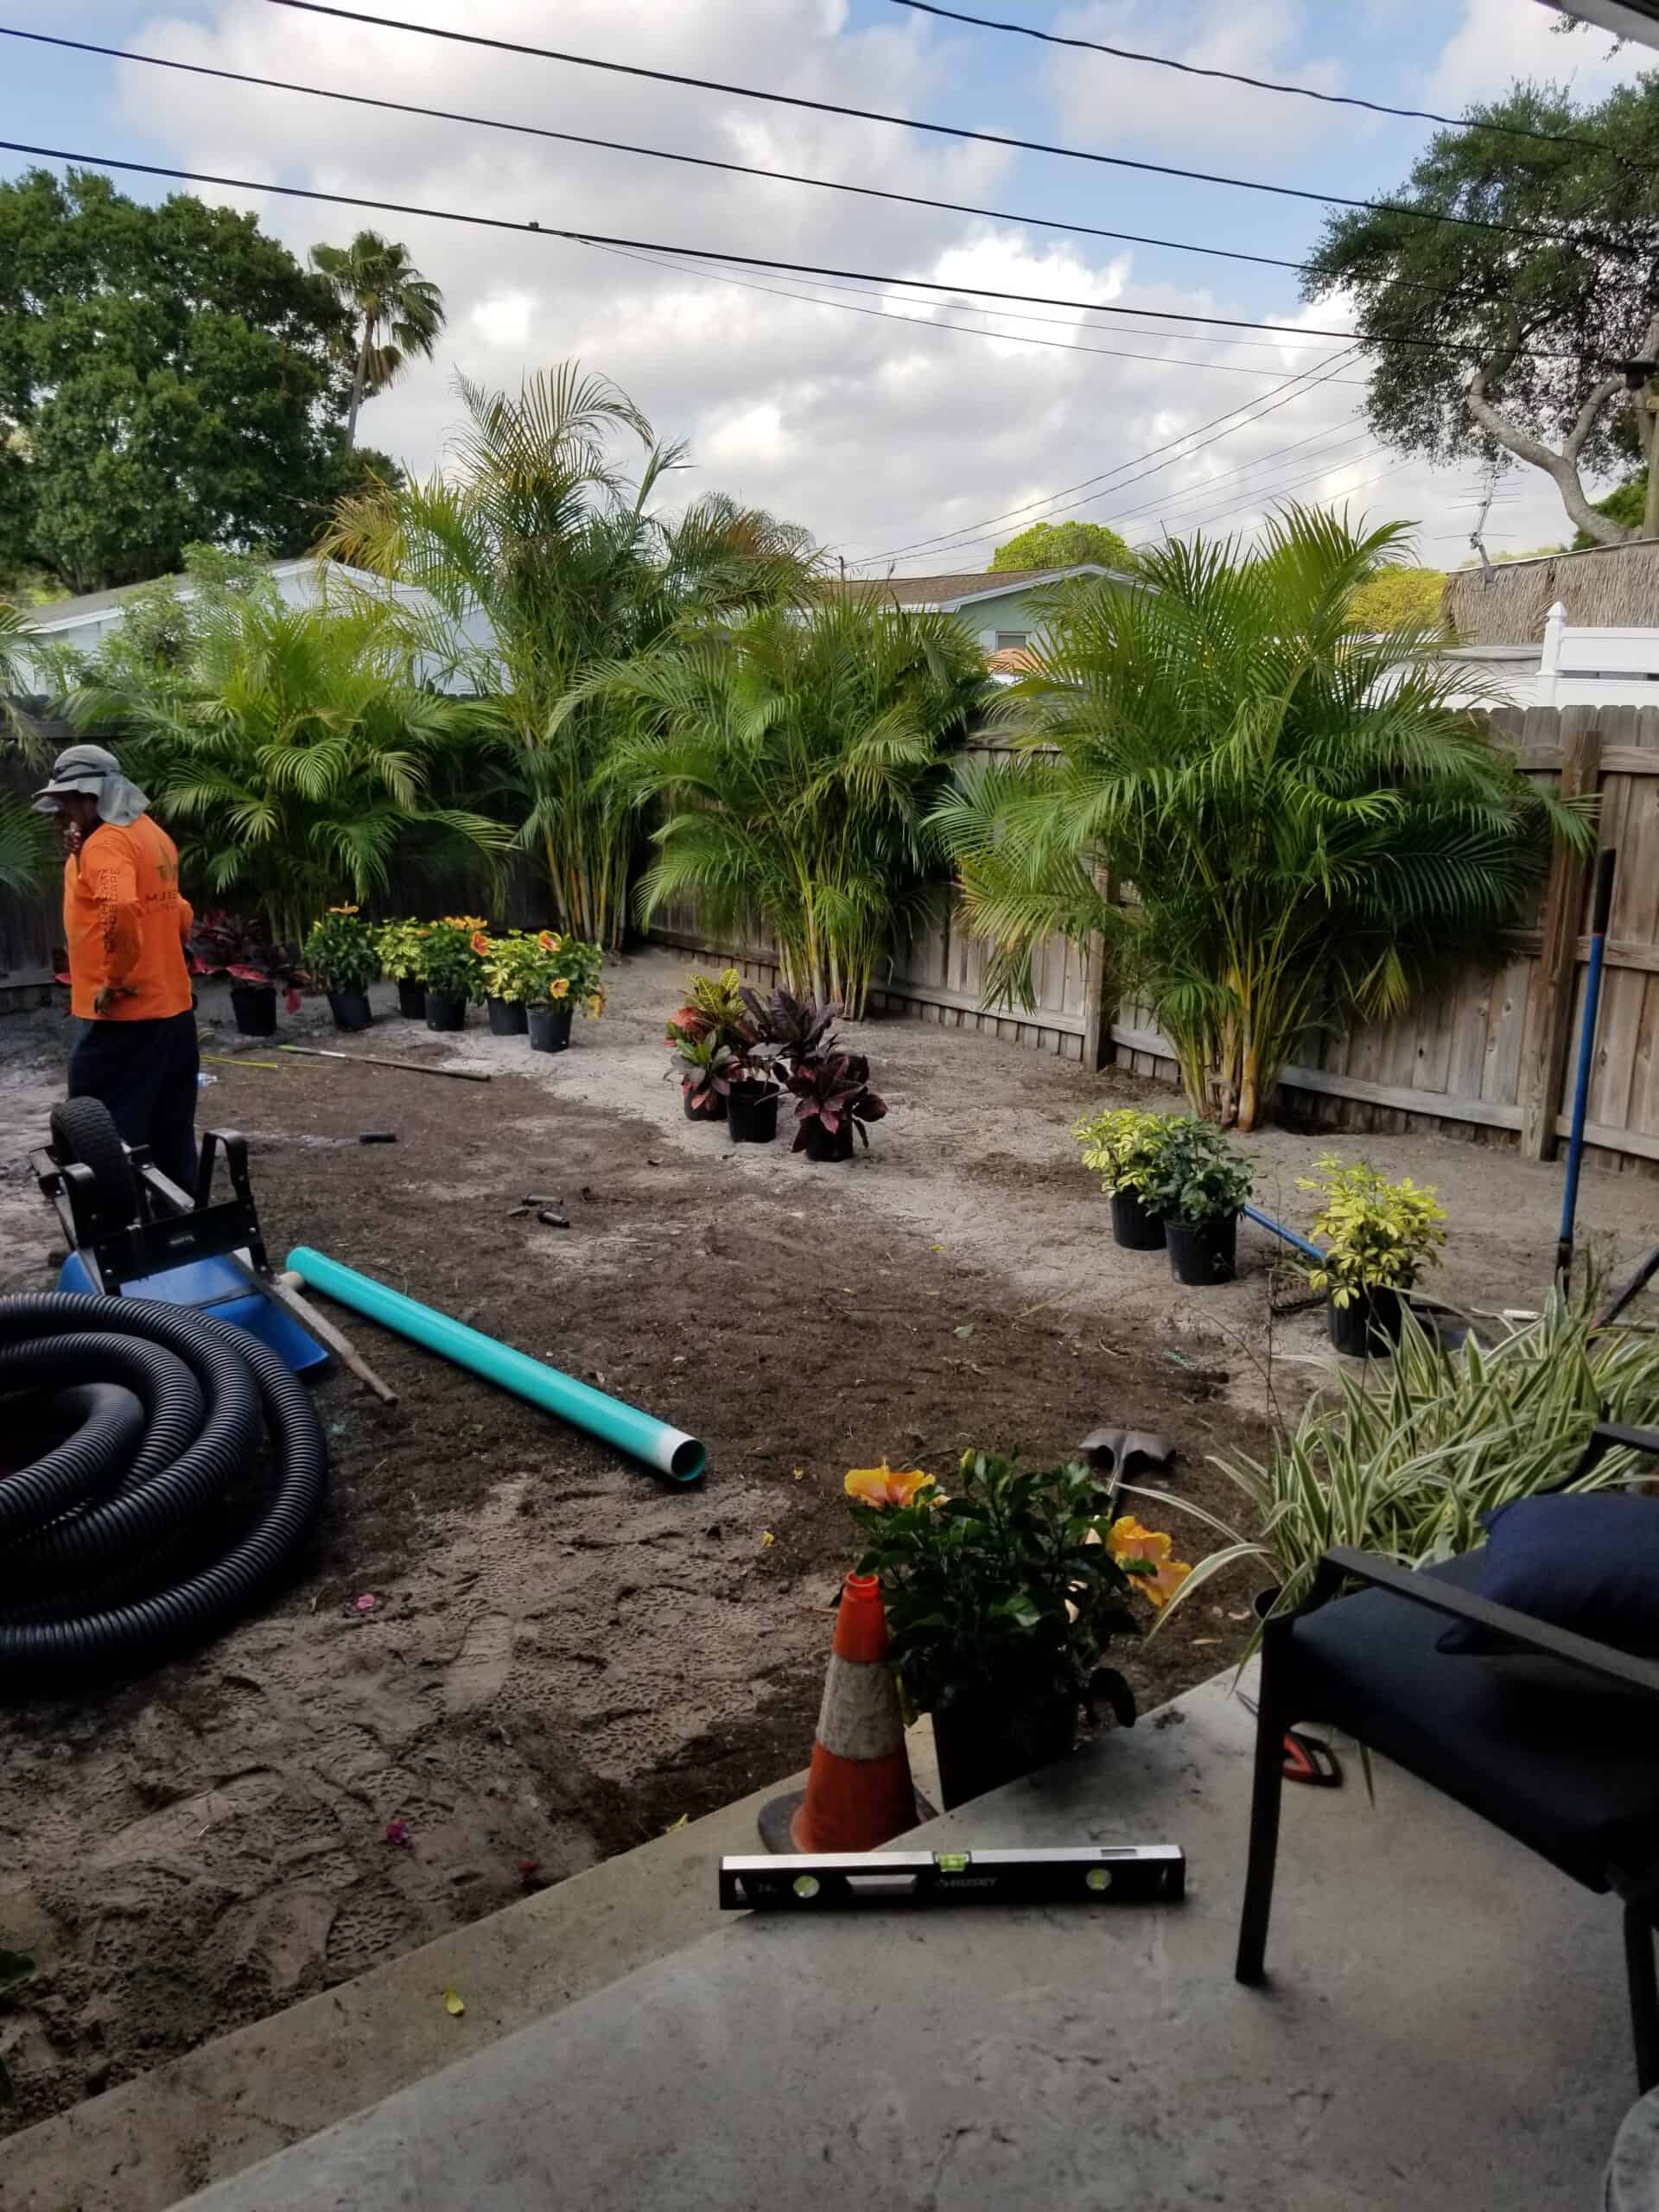 Beautiful landscape installation services in St. Pete Beach, Gulfport, and South Pasadena, FL!